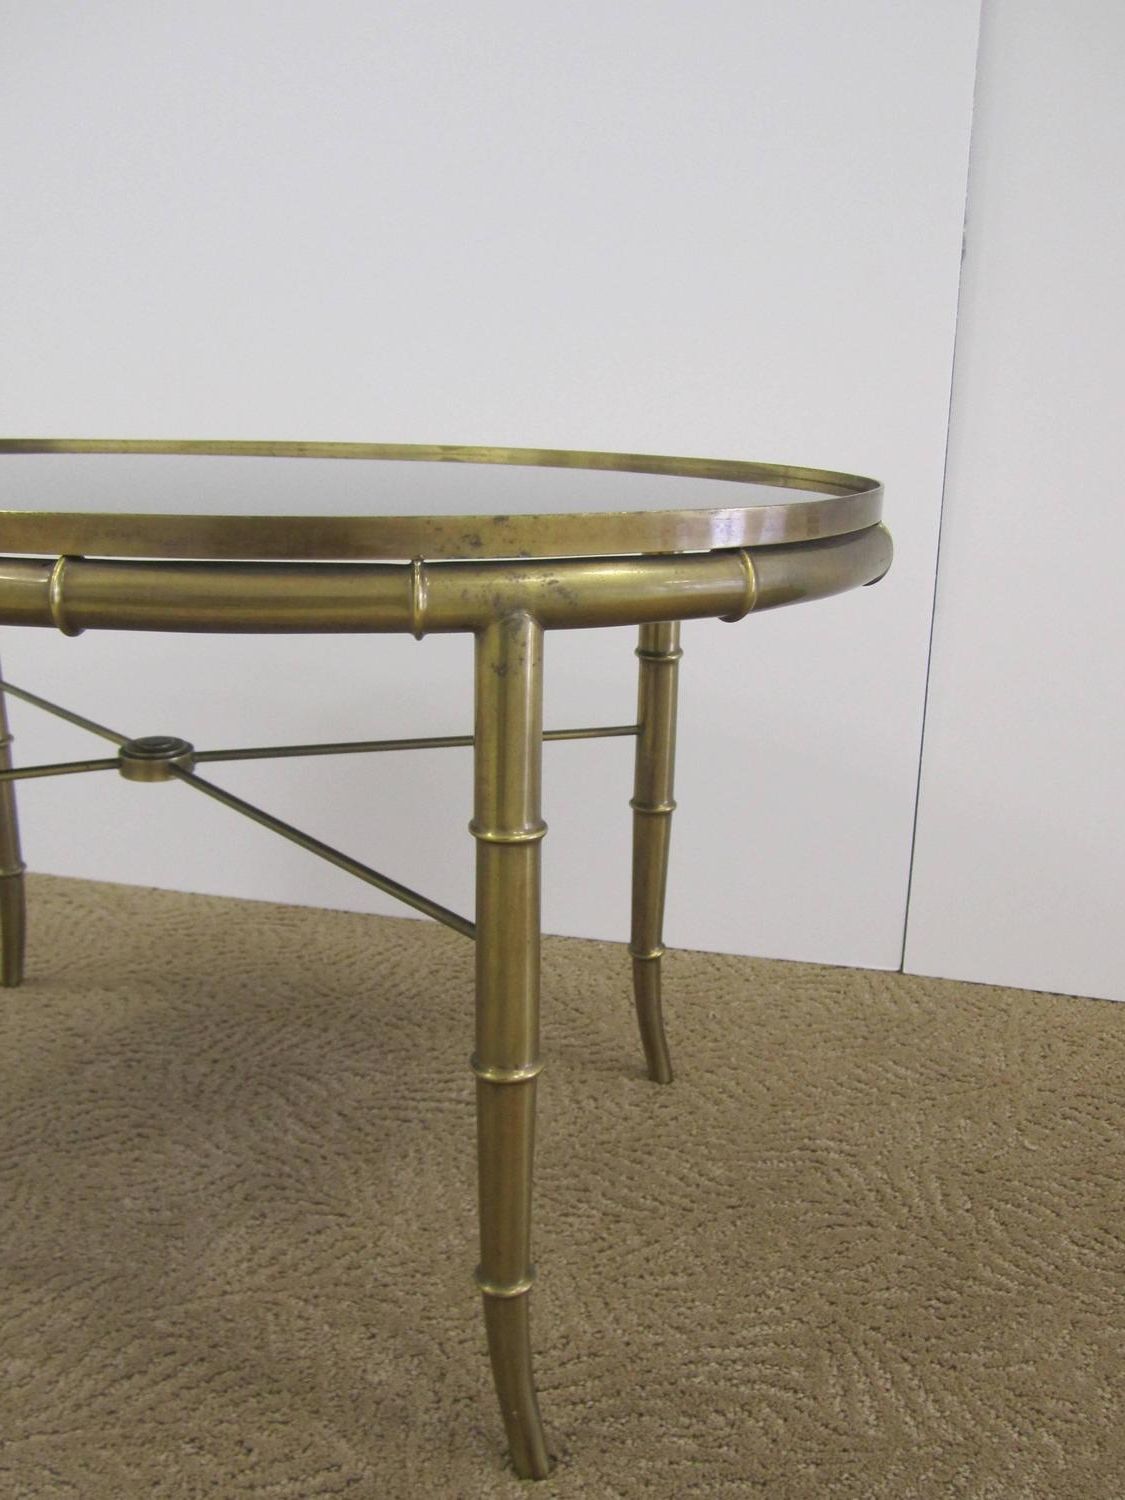 Vintage Italian Brass Cocktail Table With Black Mirrored Intended For Popular Antique Brass Round Cocktail Tables (View 7 of 20)